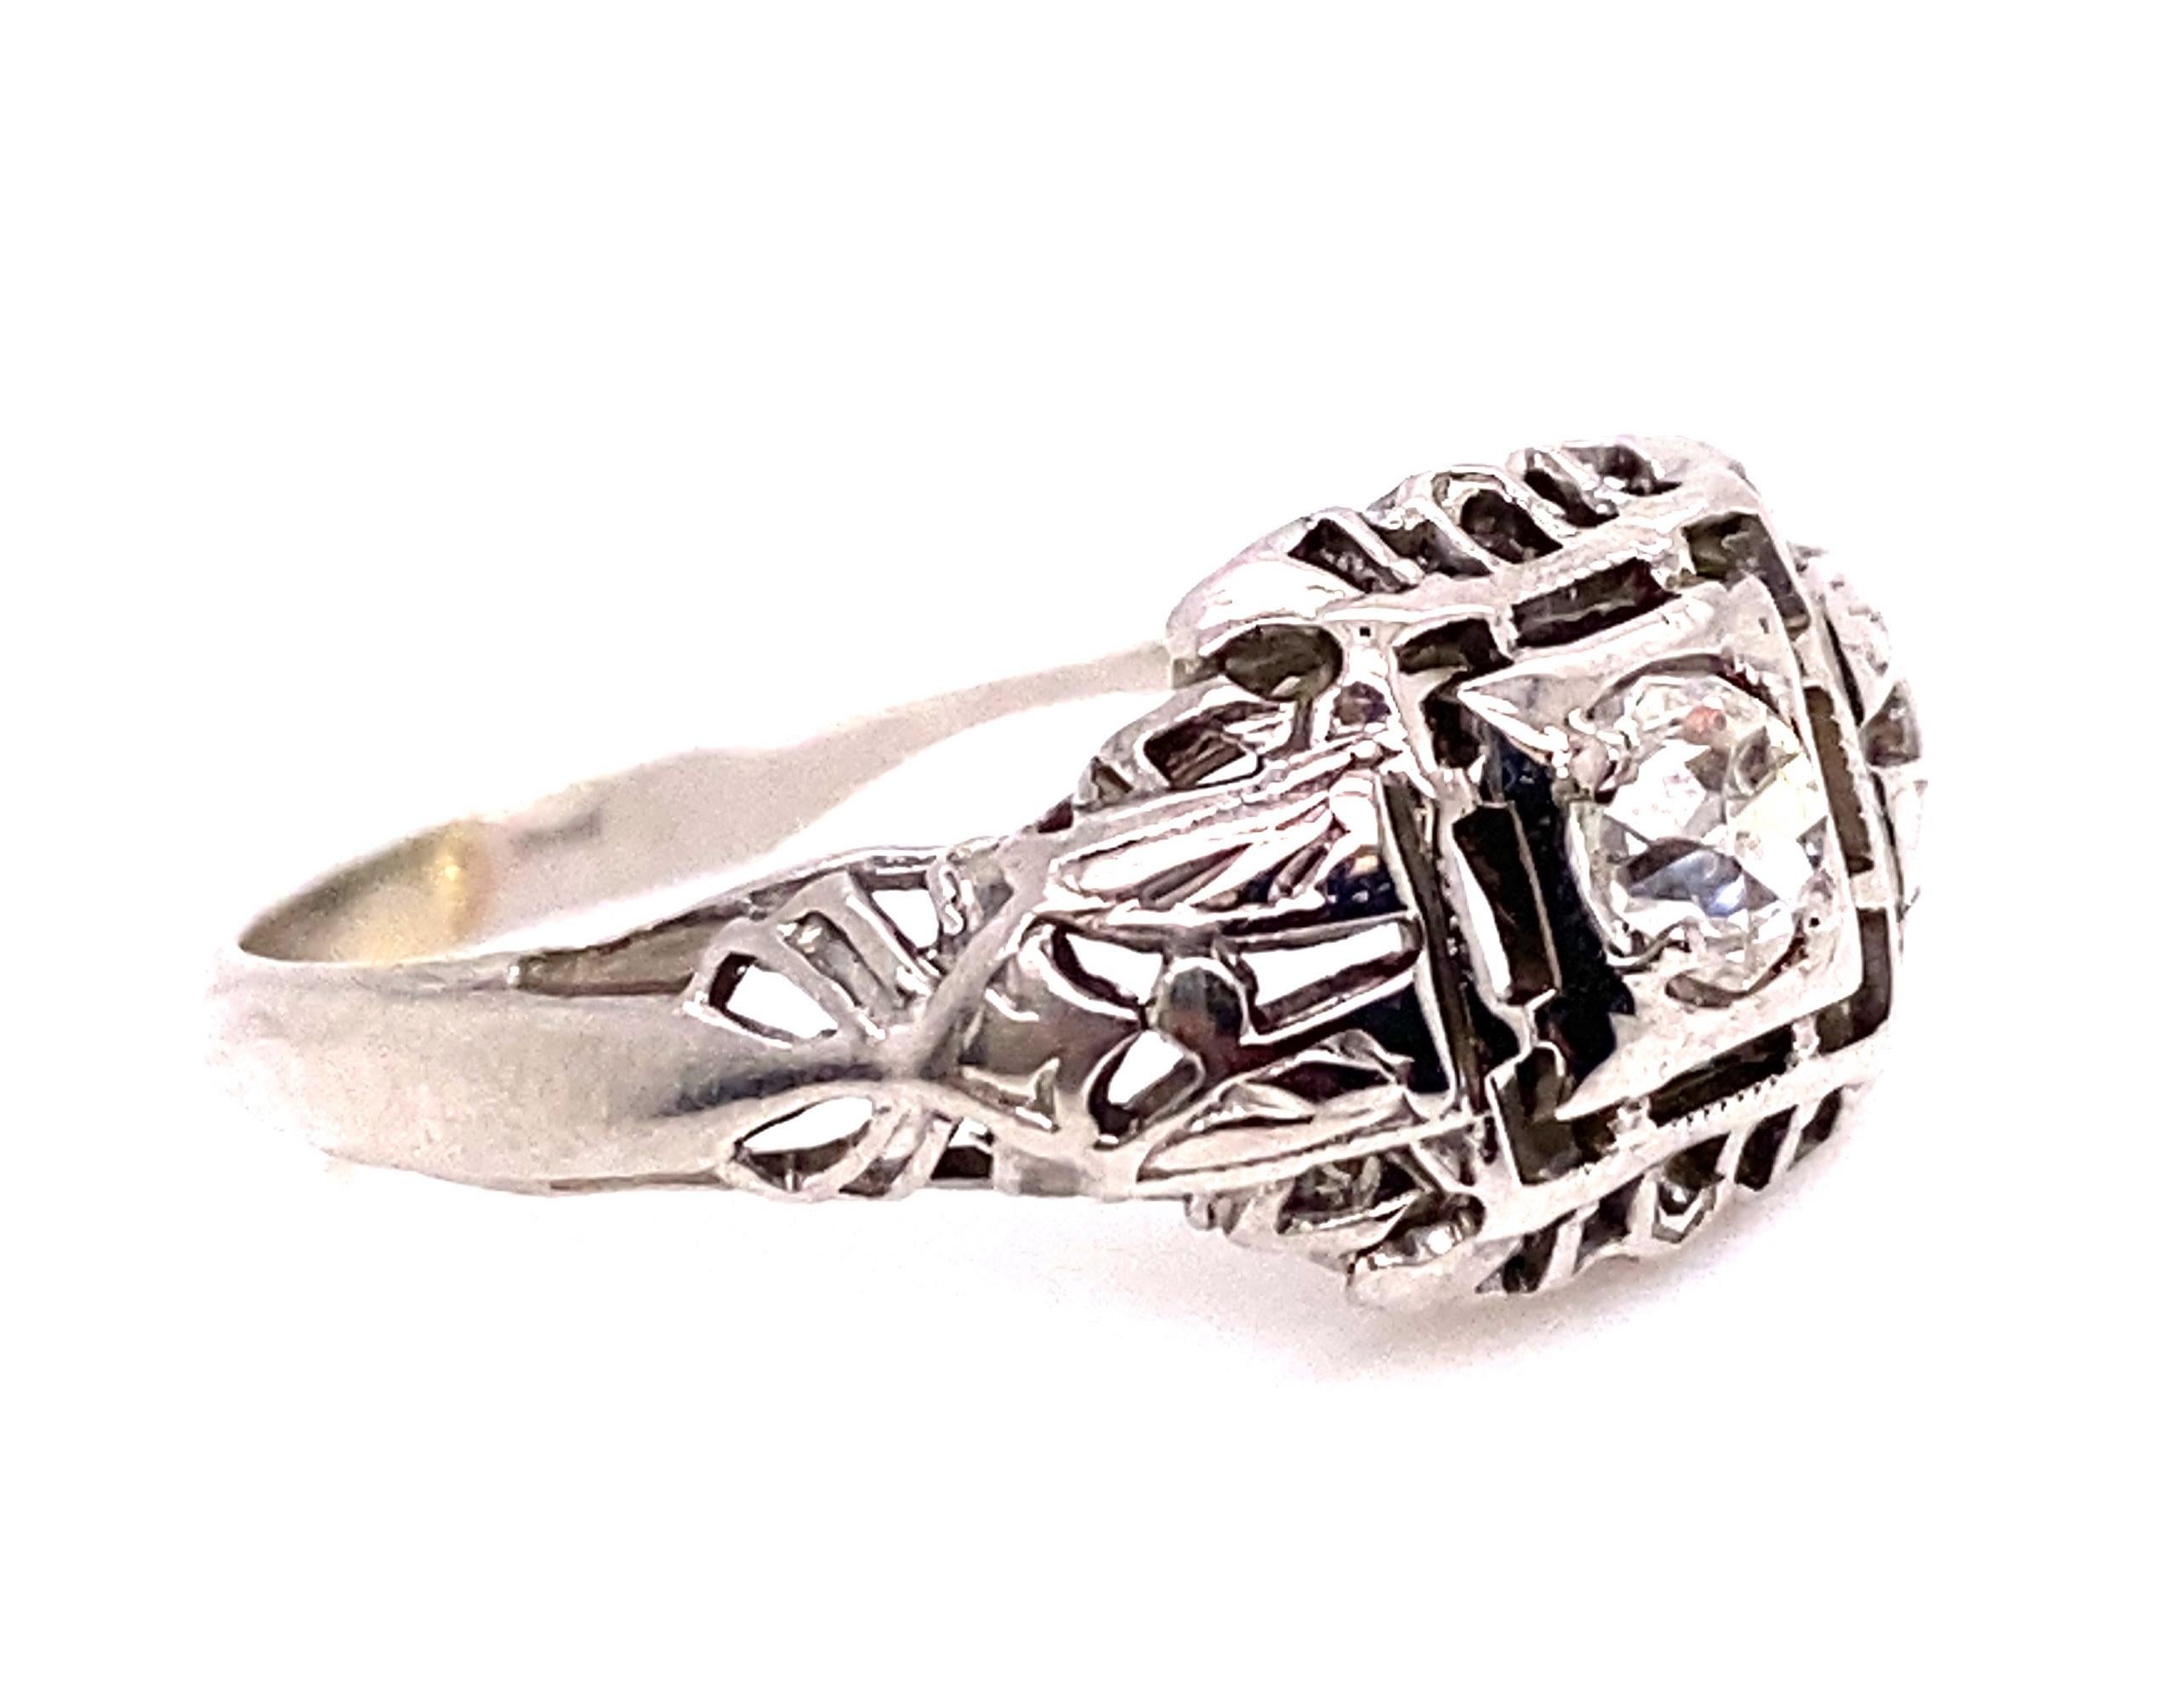 Genuine Original Antique from 1910's-1920's .18ct Diamond Solitaire Engagement Ring 18K White Gold Art Deco 



Featuring a .18ct Genuine Old Mine Cut Natural Mined Diamond Center

Spectacular Craftsmanship

Hand Engraved Filigree

100% Natural